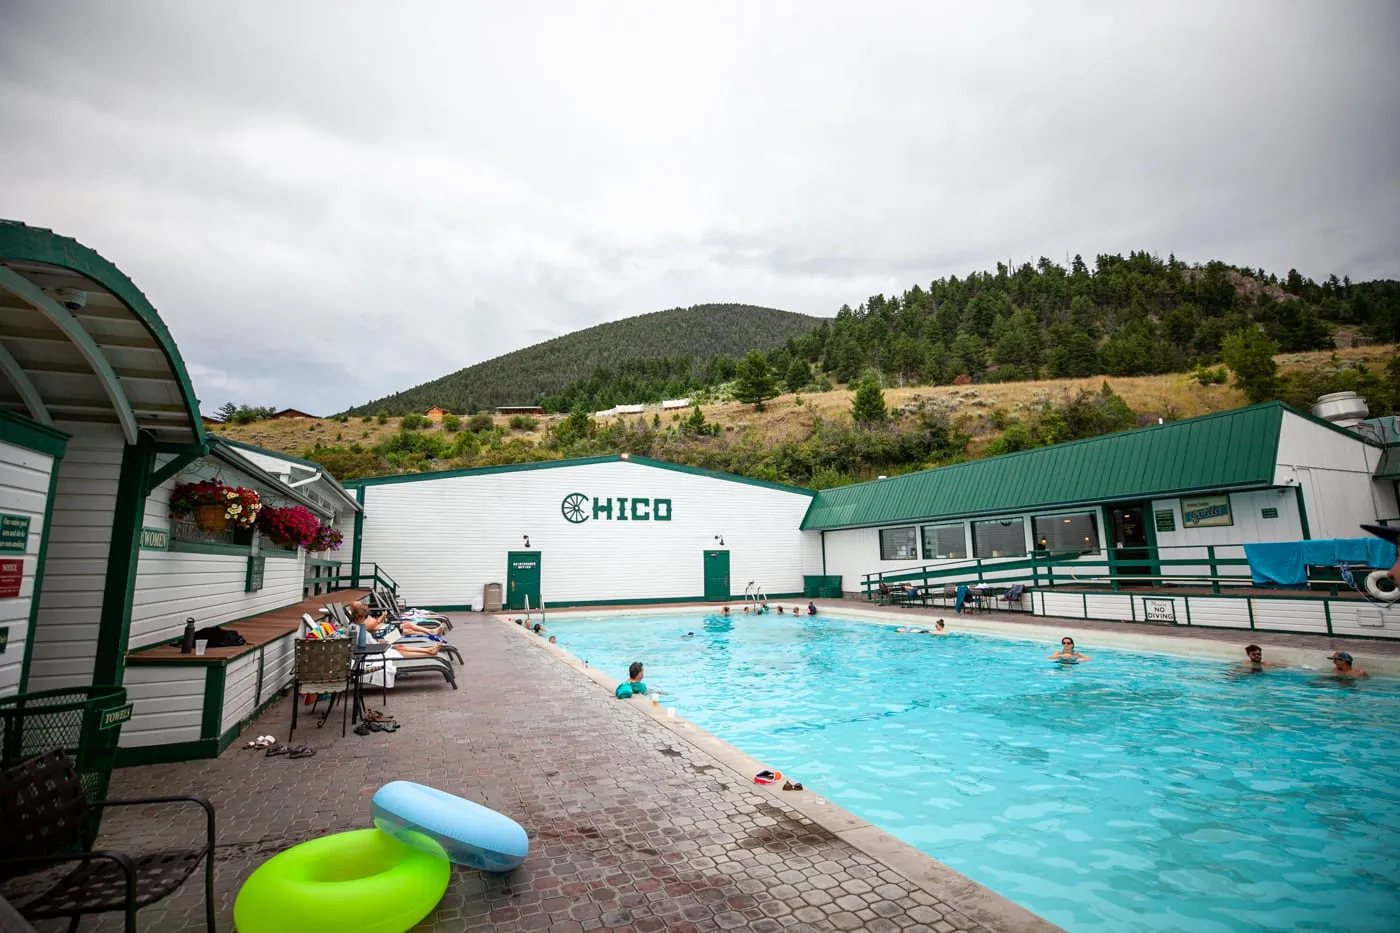 Chico Hot Springs Resort and Day Spa in Montana | Montana Road trip stop near Yellowstone National Park